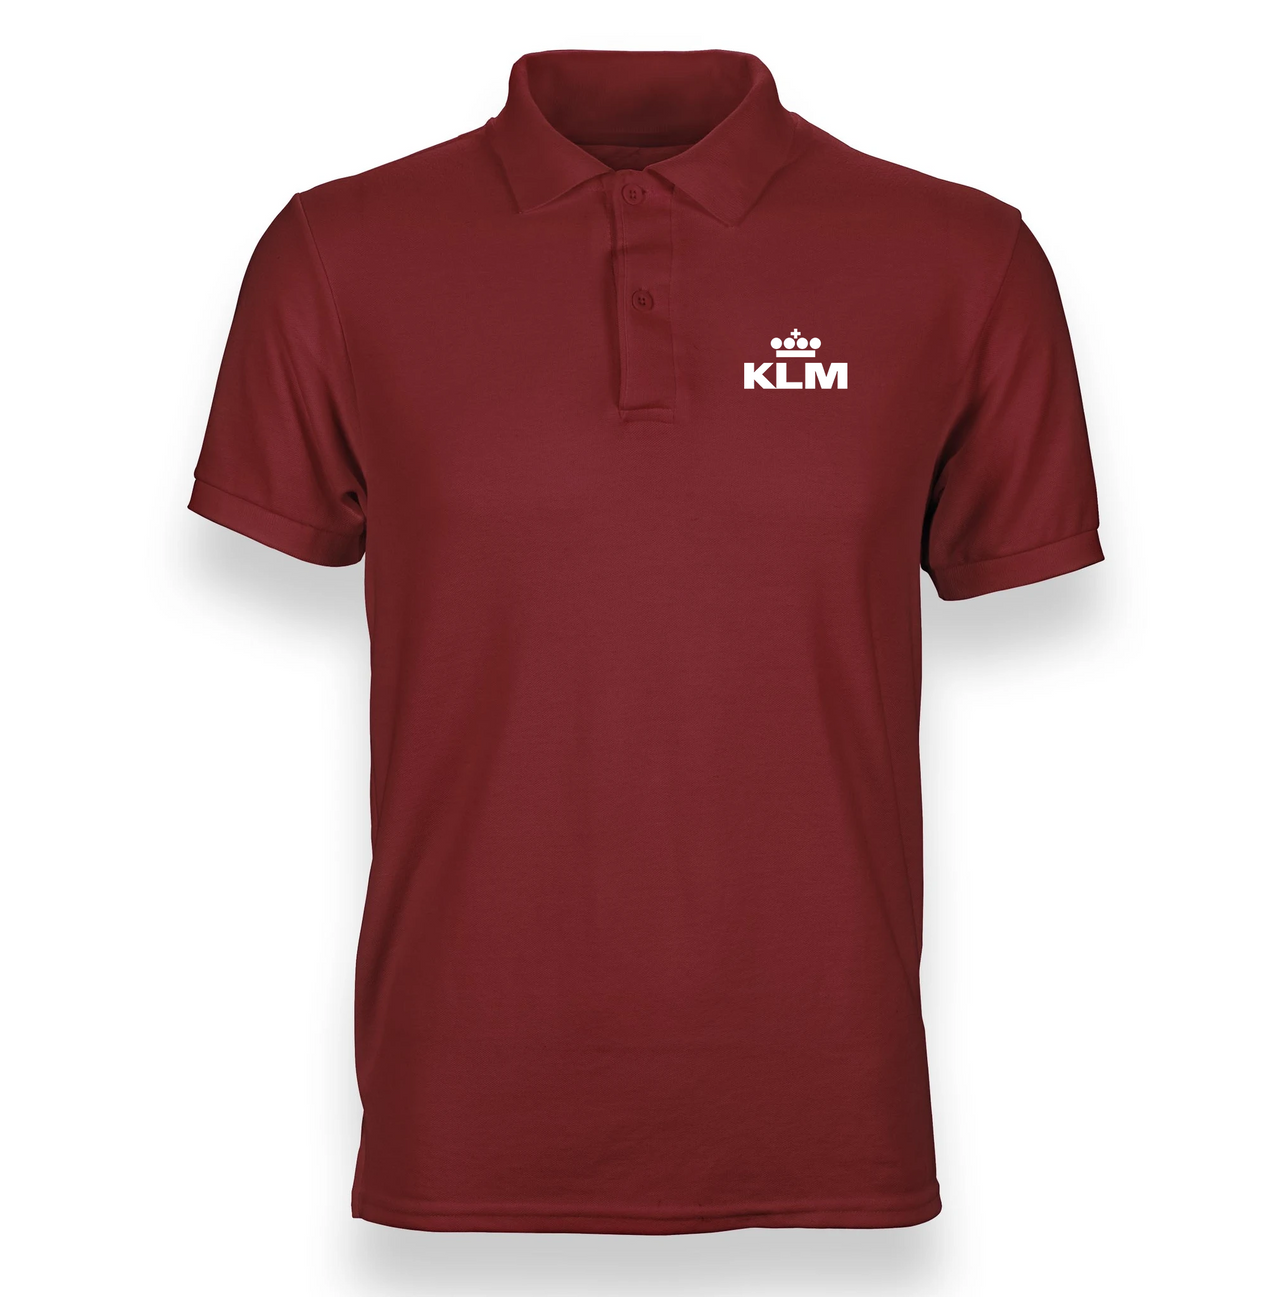 KLM AIRLINES POLO T-SHIRT